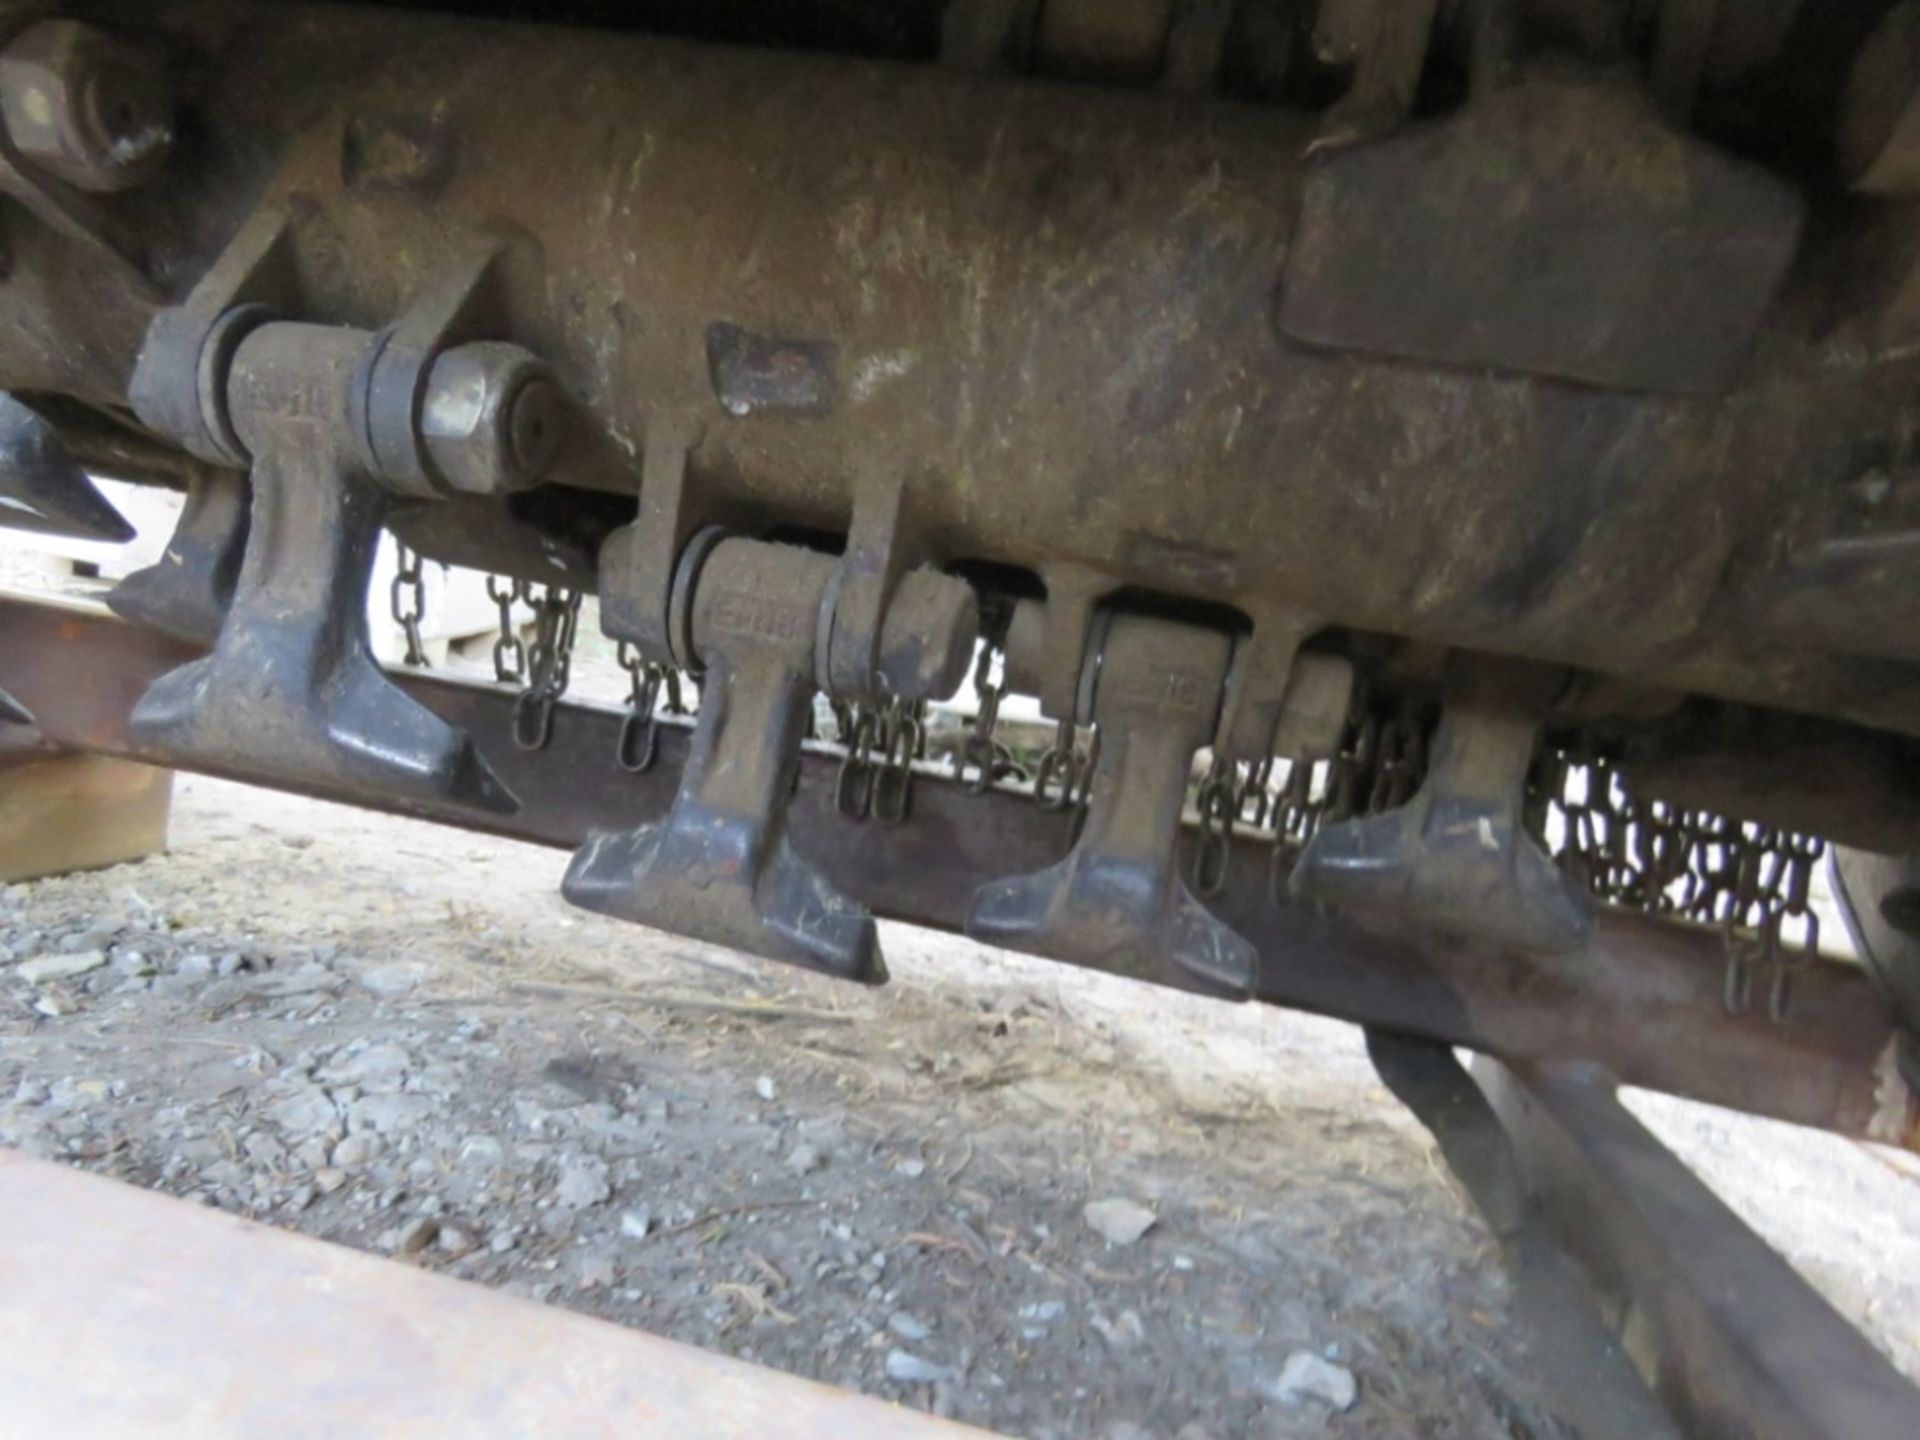 FEMAC EXCAVATOR MOUNTED HEAVY DUTY FLAIL HEAD ON 80MM PINS. UNTESTED, CONDITION UNKNOWN. - Image 2 of 10